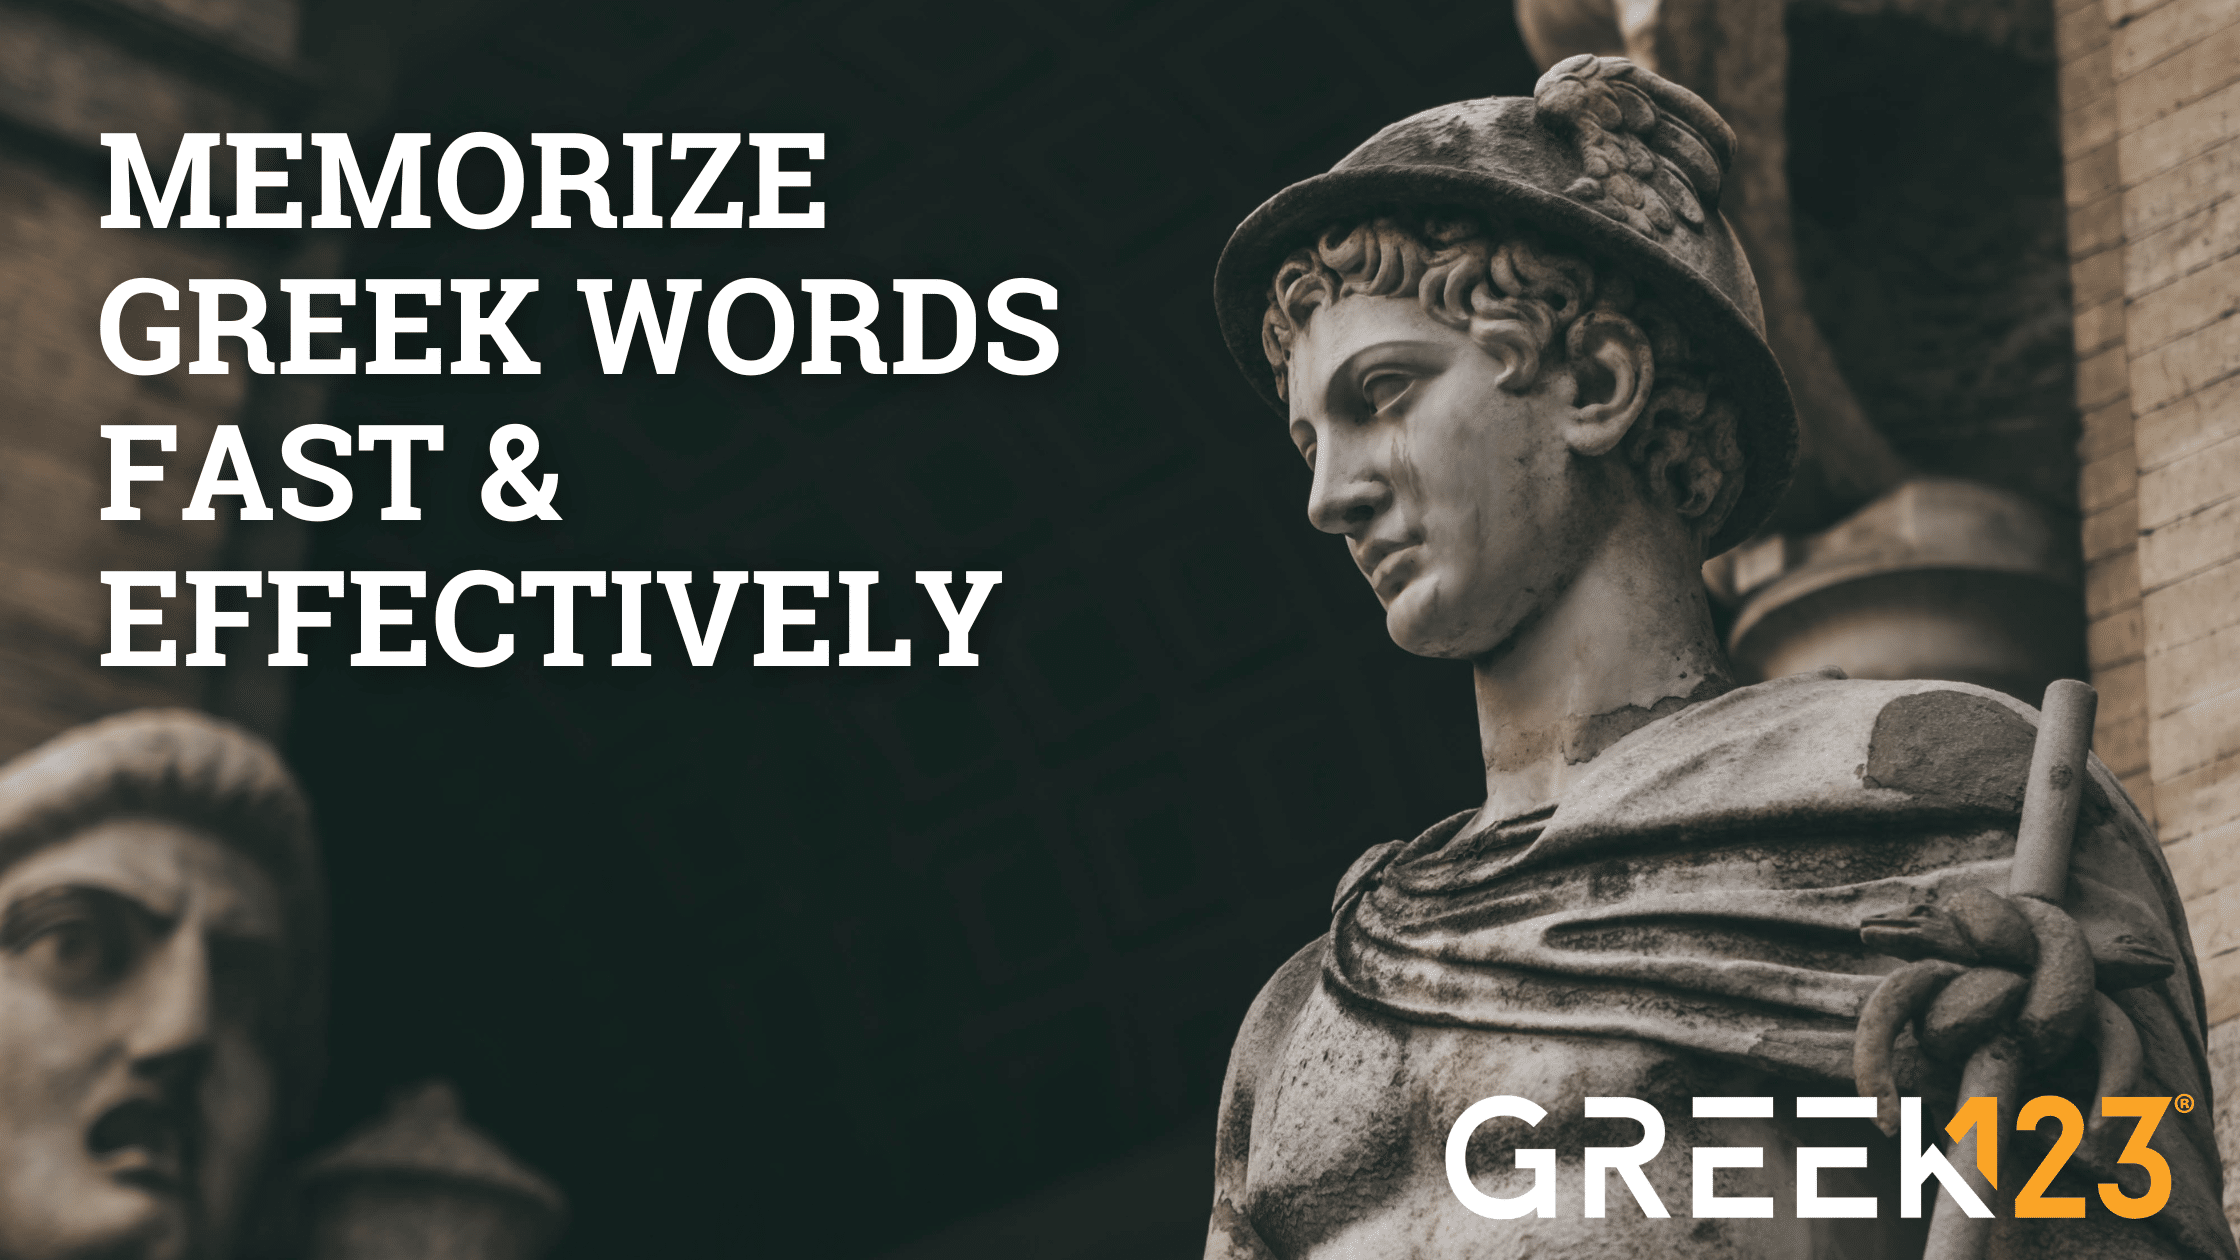 Memorize Greek Words Fast and Effectively